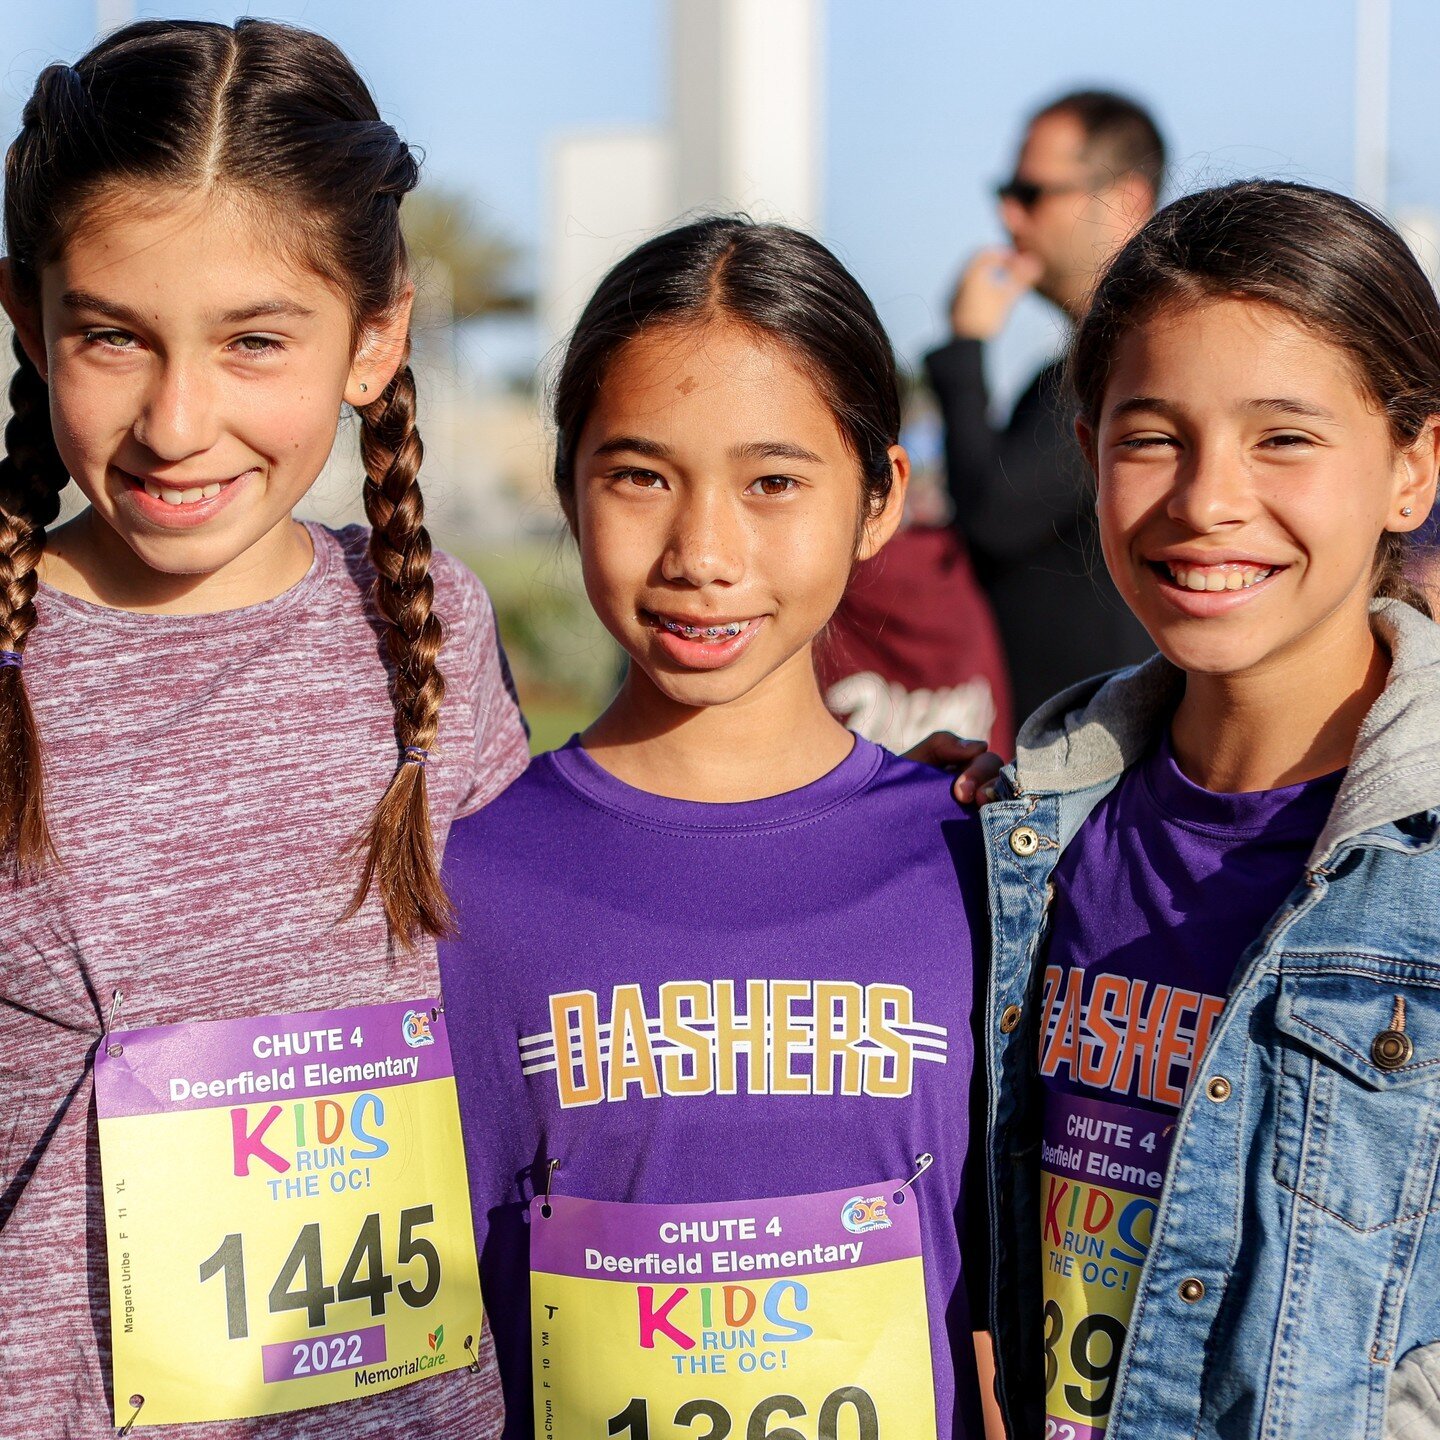 Registration closes TONIGHT for the Kids Run The OC Final Mile Event on May 6th!⁠
⁠
Head over to kidsruntheoc.org to get signed up before our cutoff at 11:59 PM. Will we see your child at this years event?⁠
⁠
#KidsRuntheOC #KidsRun #RunTheOC #OCMarat